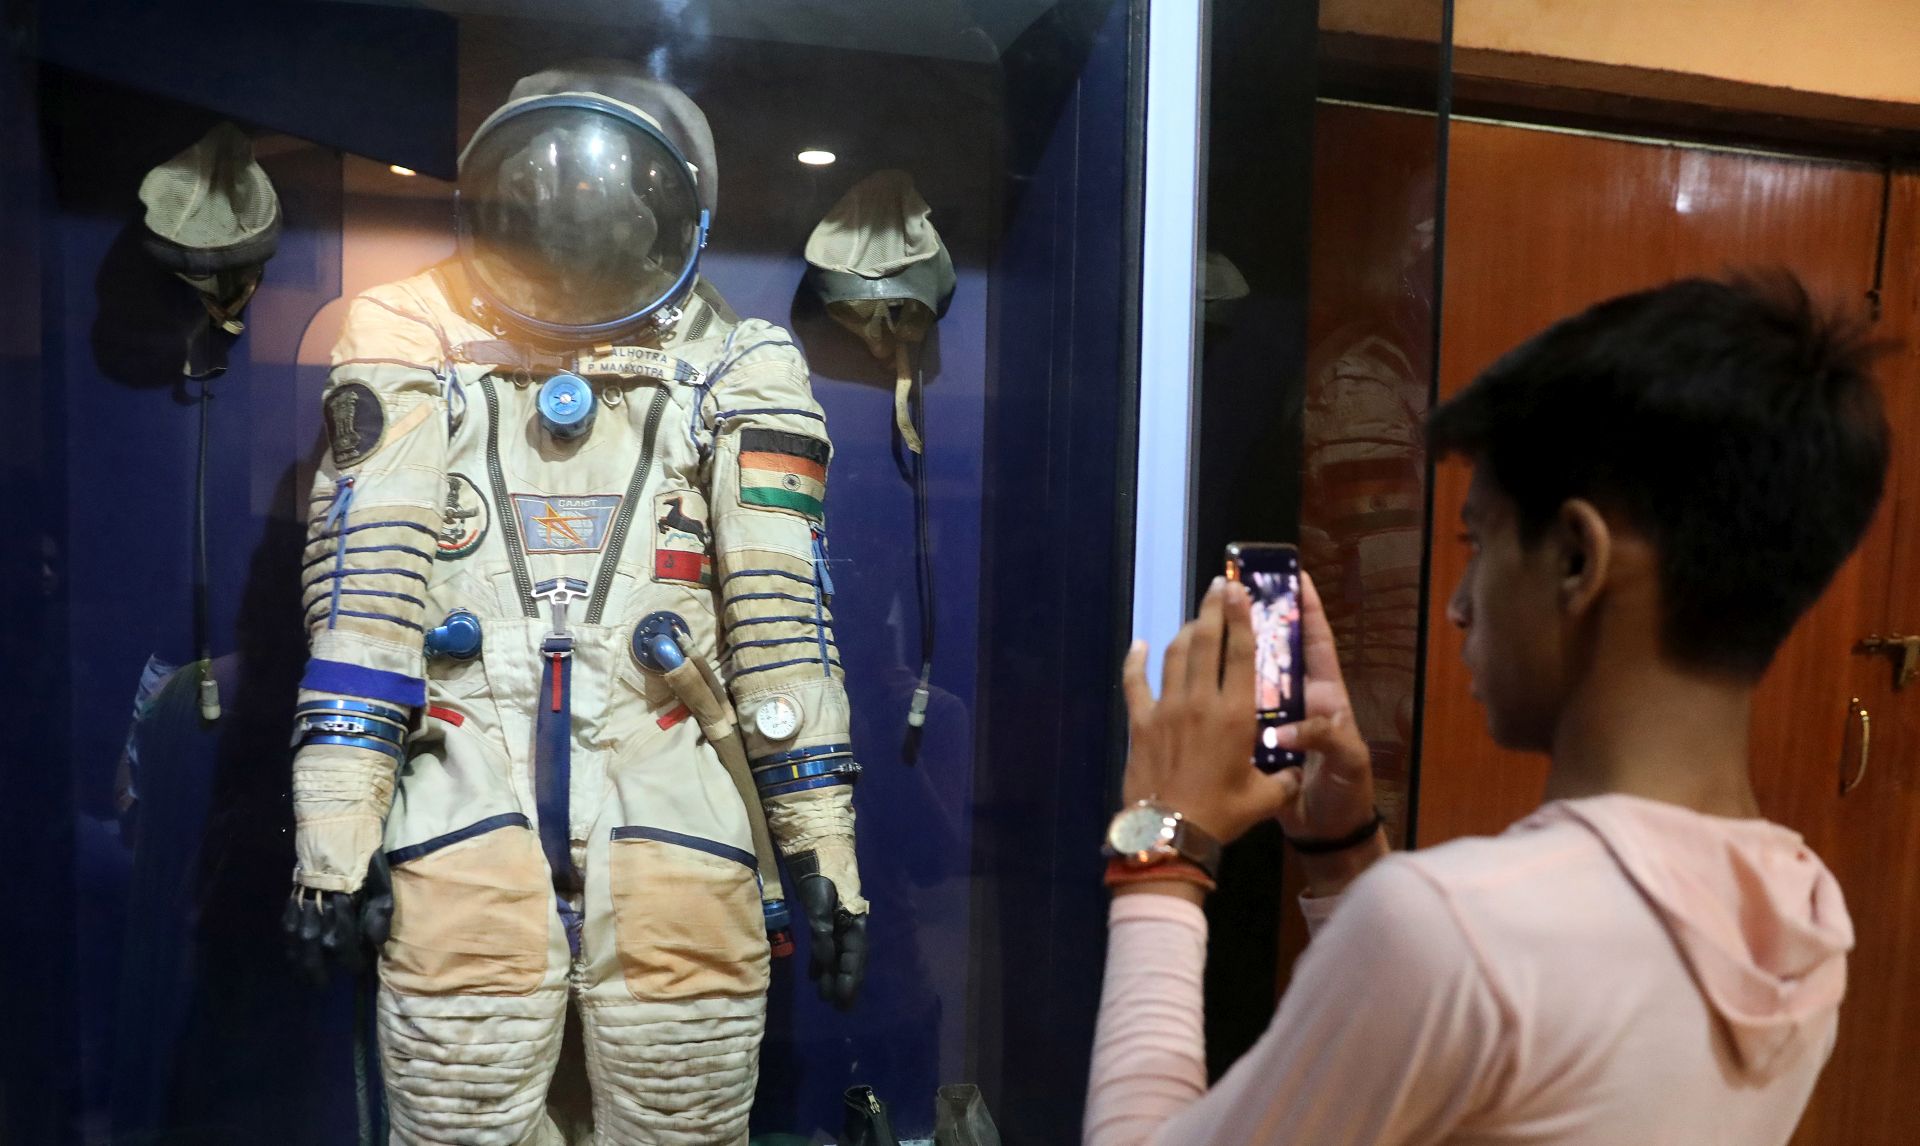 epa07714671 An Astronomy enthusiast takes the picture of a space suit displayed at Nehru Planetarium in New Delhi, India, 13 July 2019.  Chandrayaan-2 India's first moon lander and rover mission planned and developed by Indian Space Research Organisation (ISRO), named 'Vikram', and the robotic rover that explores the lunar surface named 'Pragyan' (wisdom) will be launched on the Moon by a Geosynchronous Satellite Launch Vehicle (GSLV) Mark III on 15 July 2019.  EPA/RAJAT GUPTA